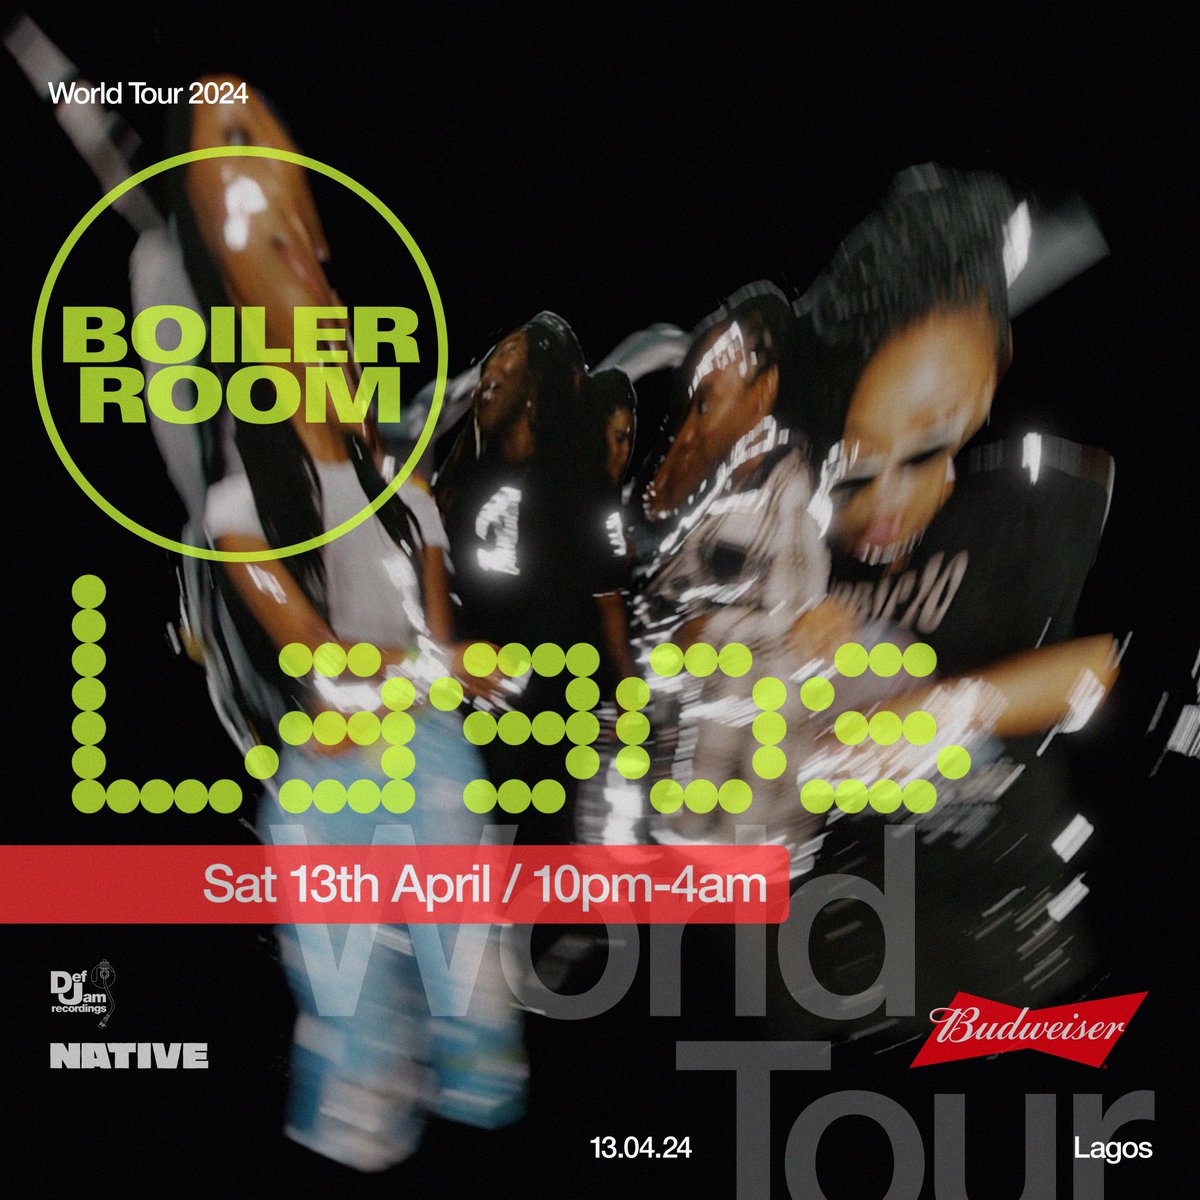 ON SALE: Boiler Room returns to Lagos🇳🇬🔥 For the first time since 2016, Boiler Room is back in Lagos, curated by The NATIVE & Def Jam. Tickets on-sale now, starting from N7500 via: boilerroom.tv/city/lagos